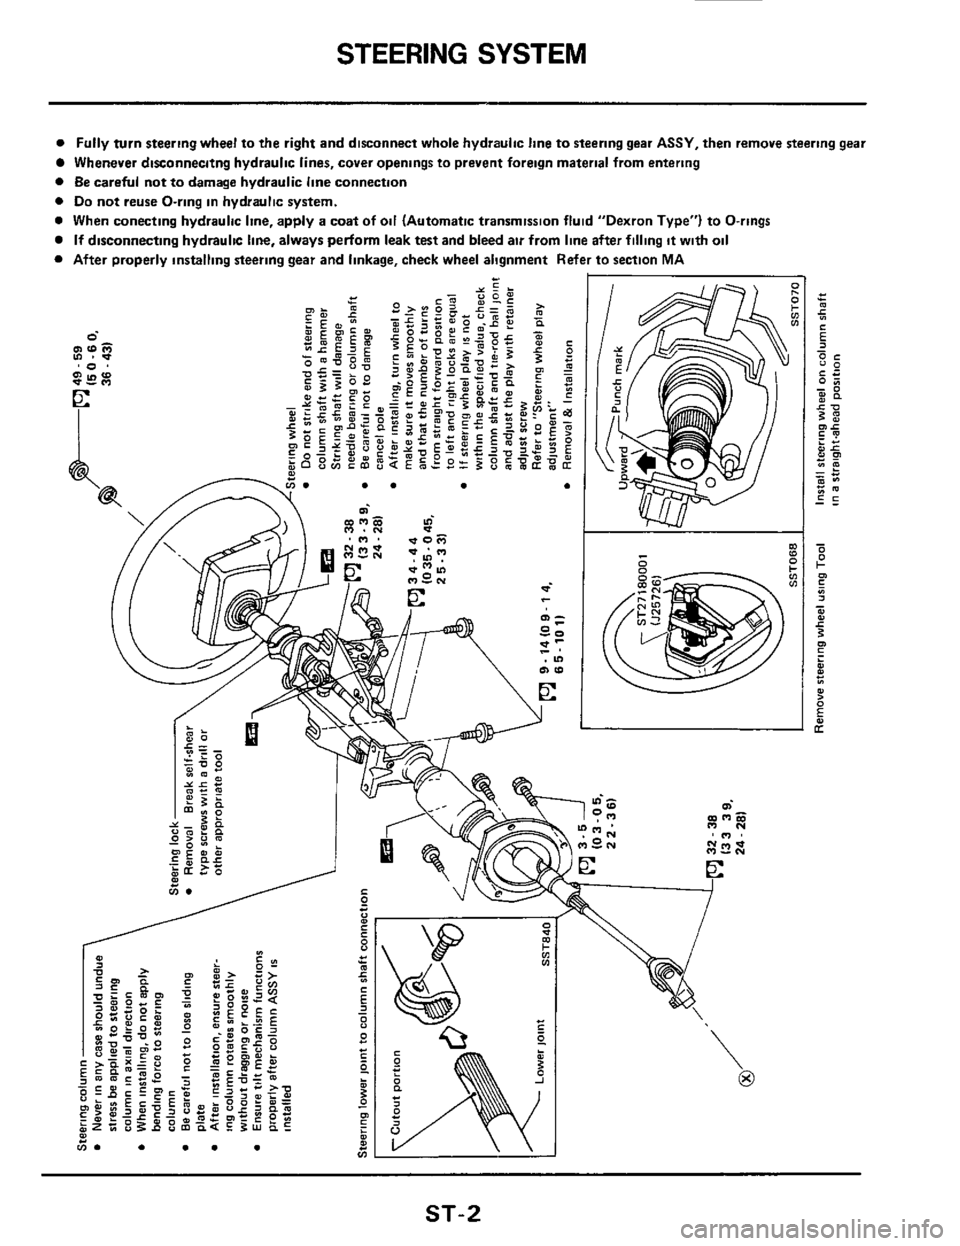 NISSAN 300ZX 1984 Z31 Steering System Workshop Manual STEERING SYSTEM 
a Fully turn steering wheel to the  right  and disconnect whole  hydraulic line to steering  gear ASSY.  then remove steering  gear 
Whenever dirconnecitng hydraulic  lines, cover  op